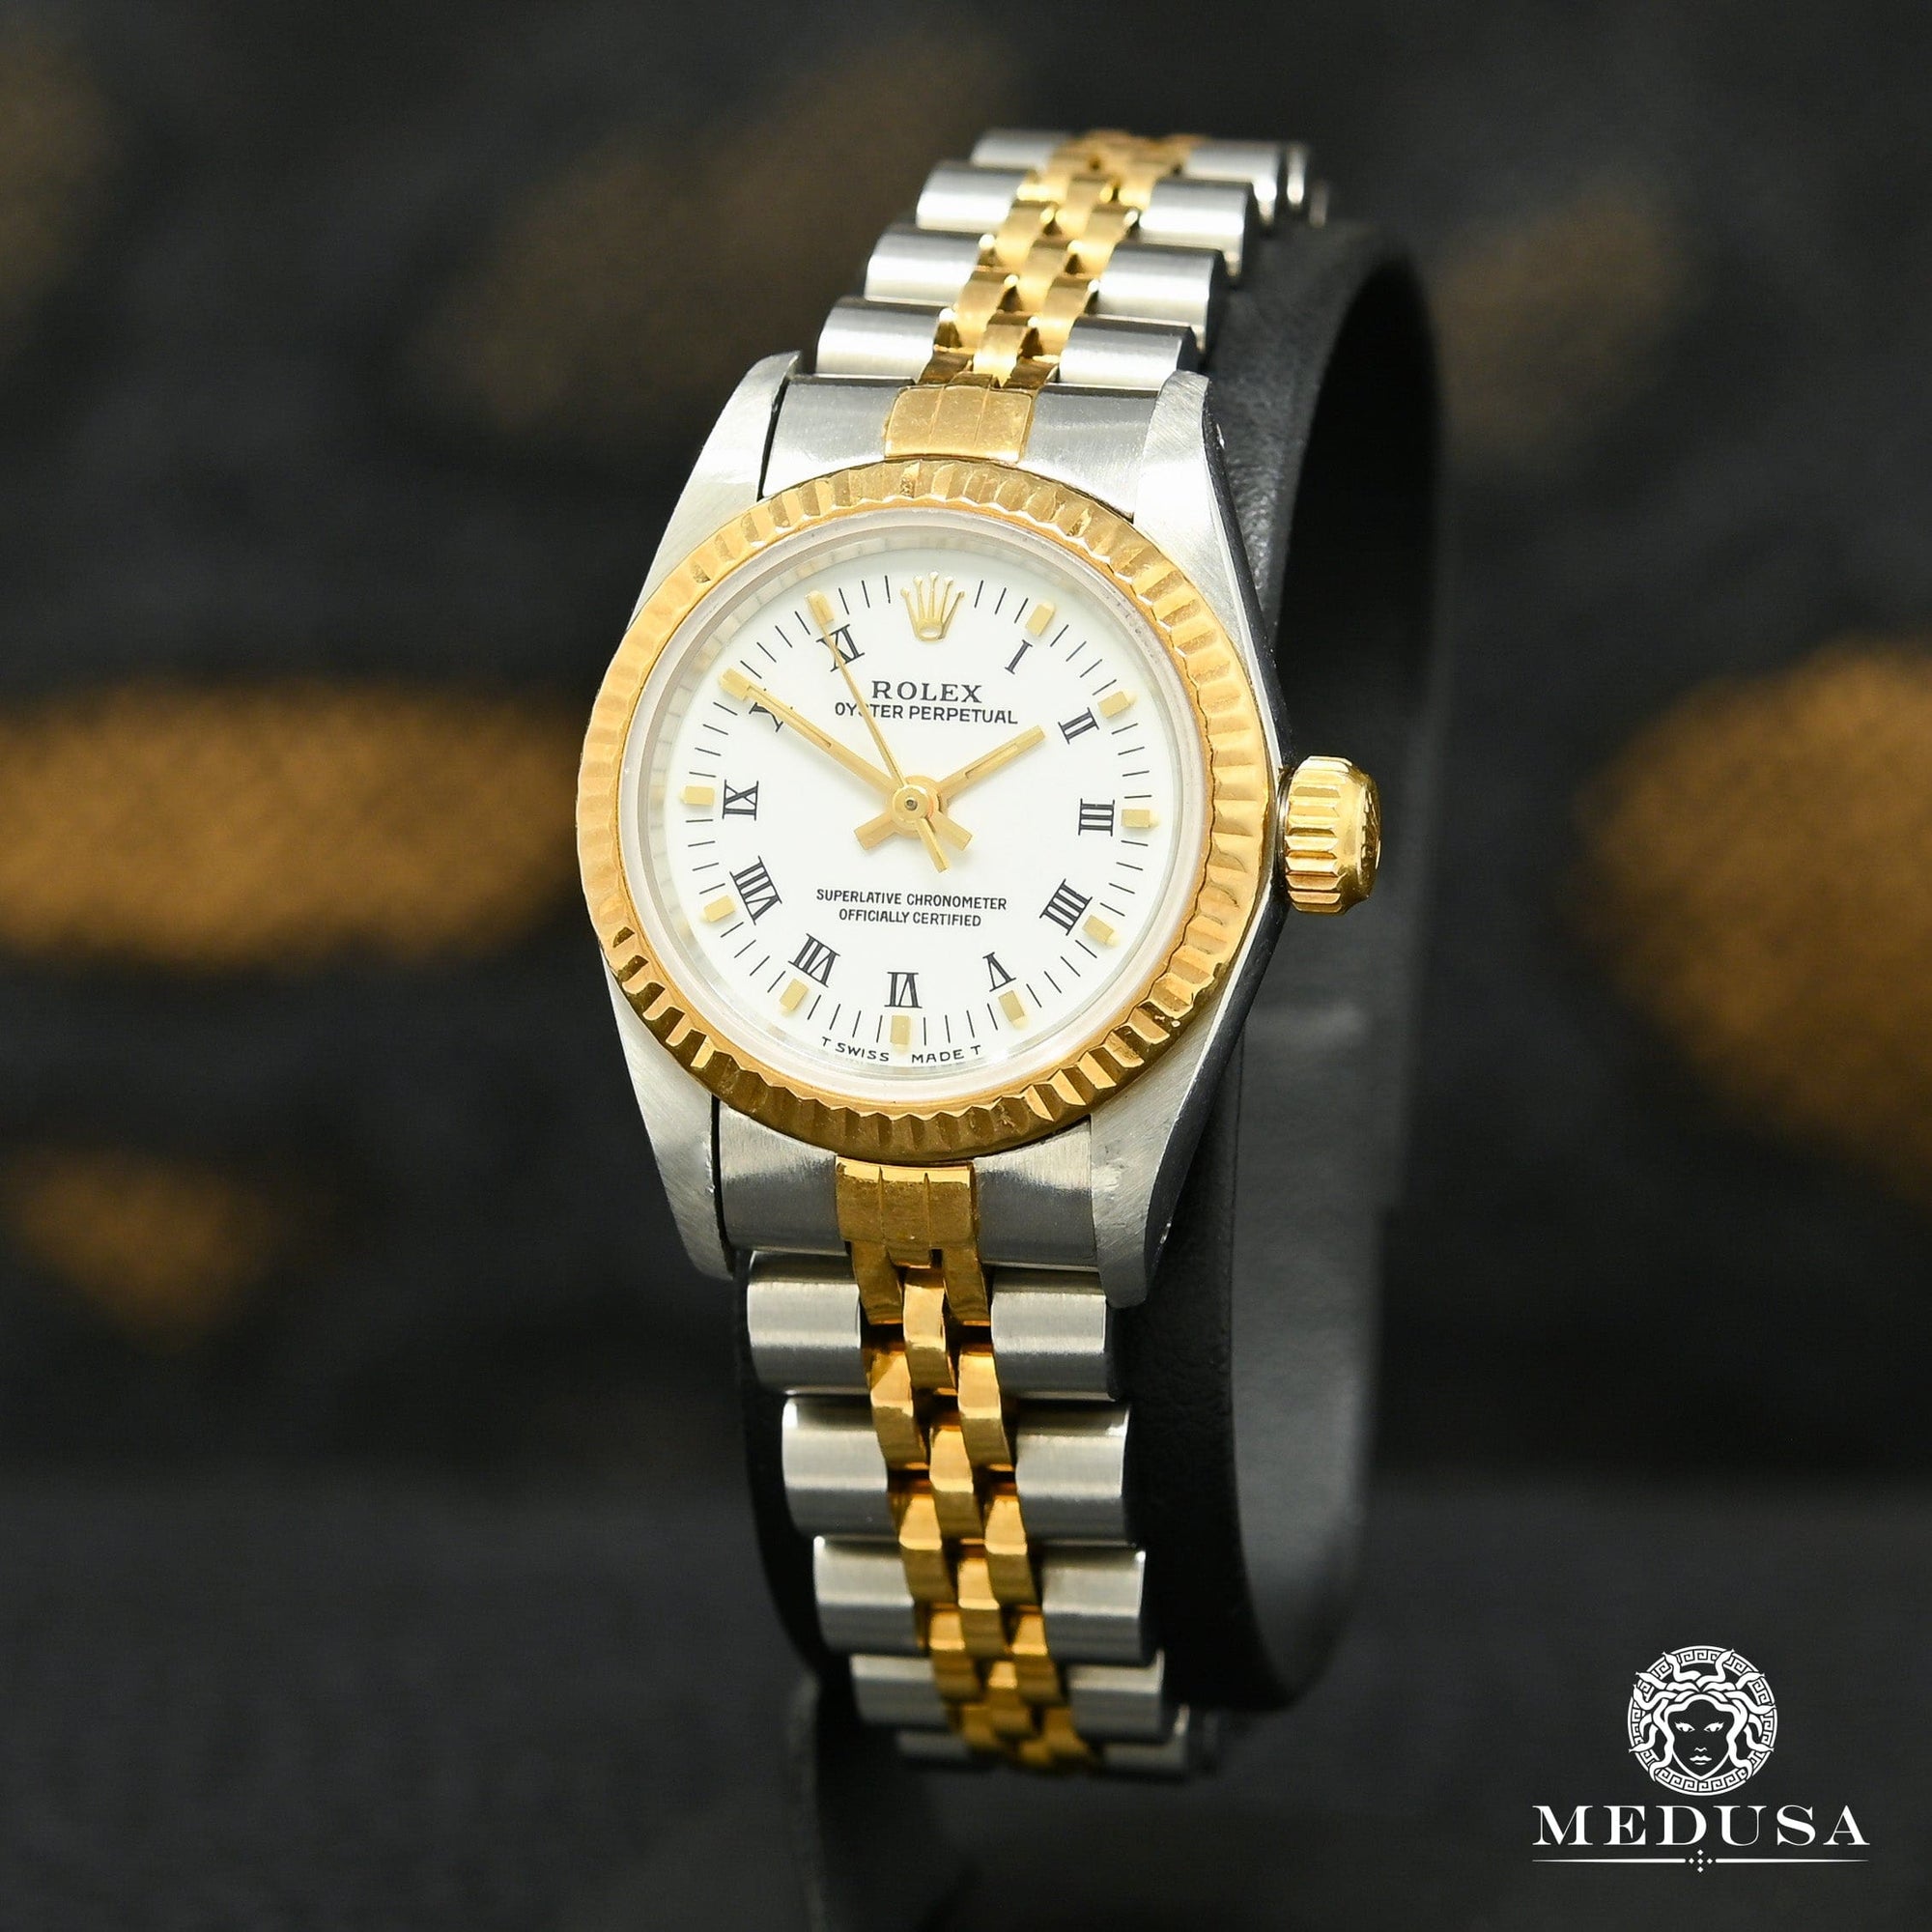 Rolex watch | Rolex Oyster Perpetual Ladies Watch 26mm - White Gold 2 Tones